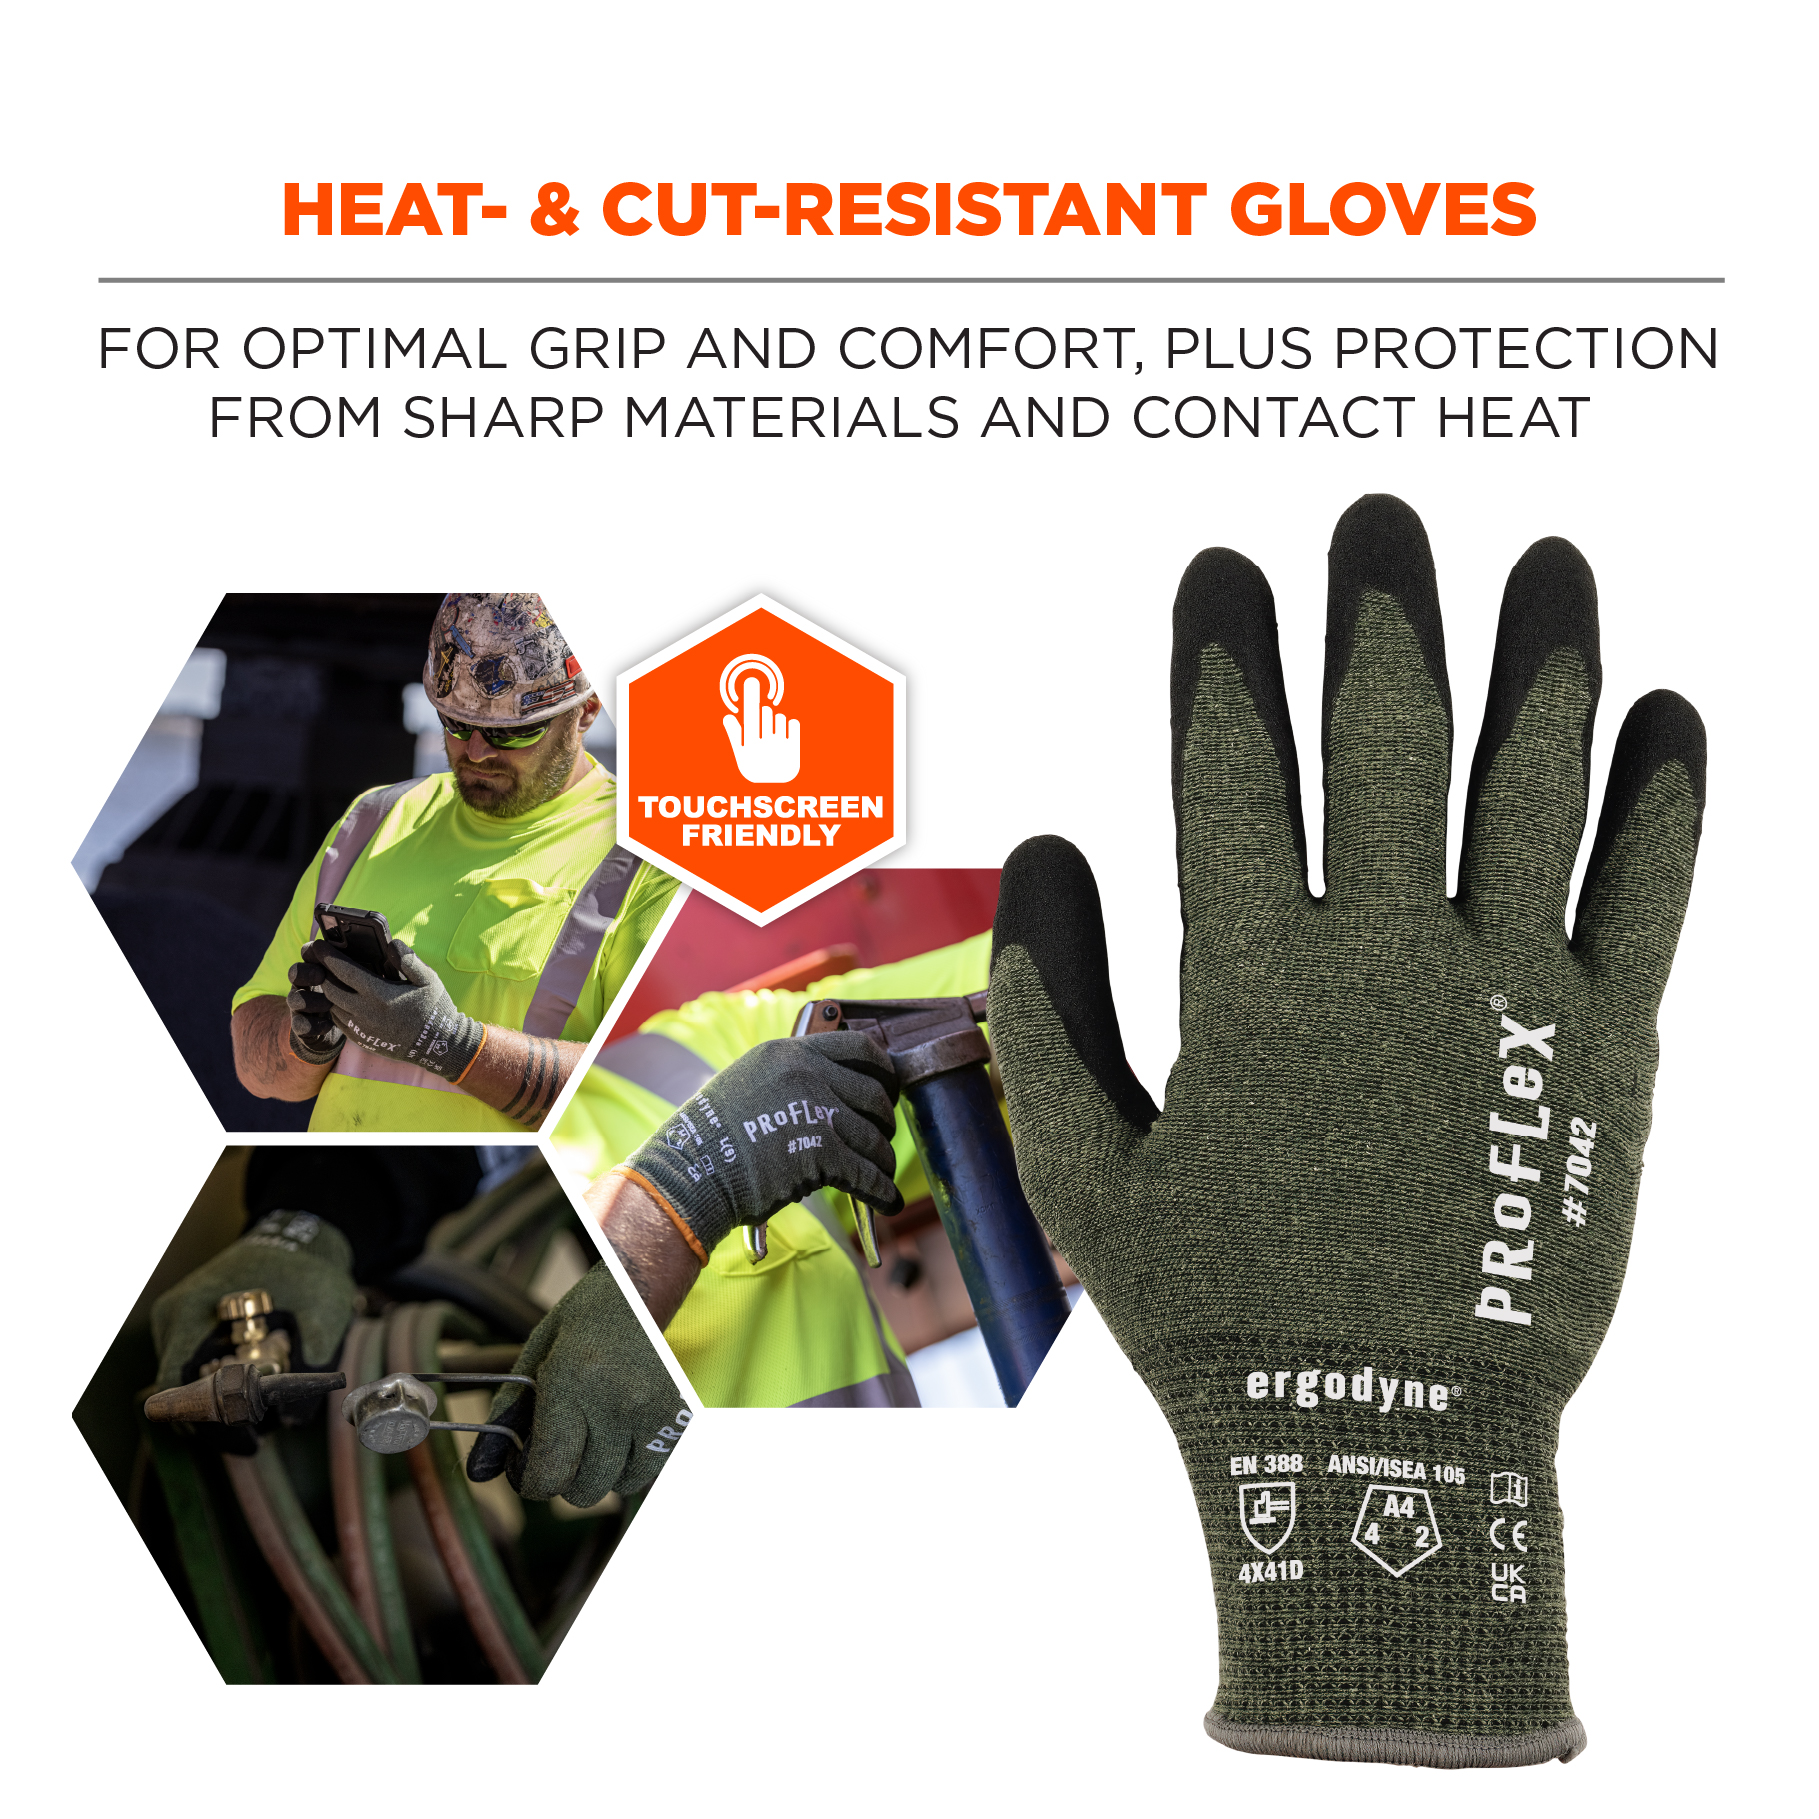 https://www.ergodyne.com/sites/default/files/product-images/10342-7042-ansi-a4-nitrile-coated-cr-gloves-green-heat-and-cut-resistant-gloves_0.jpg